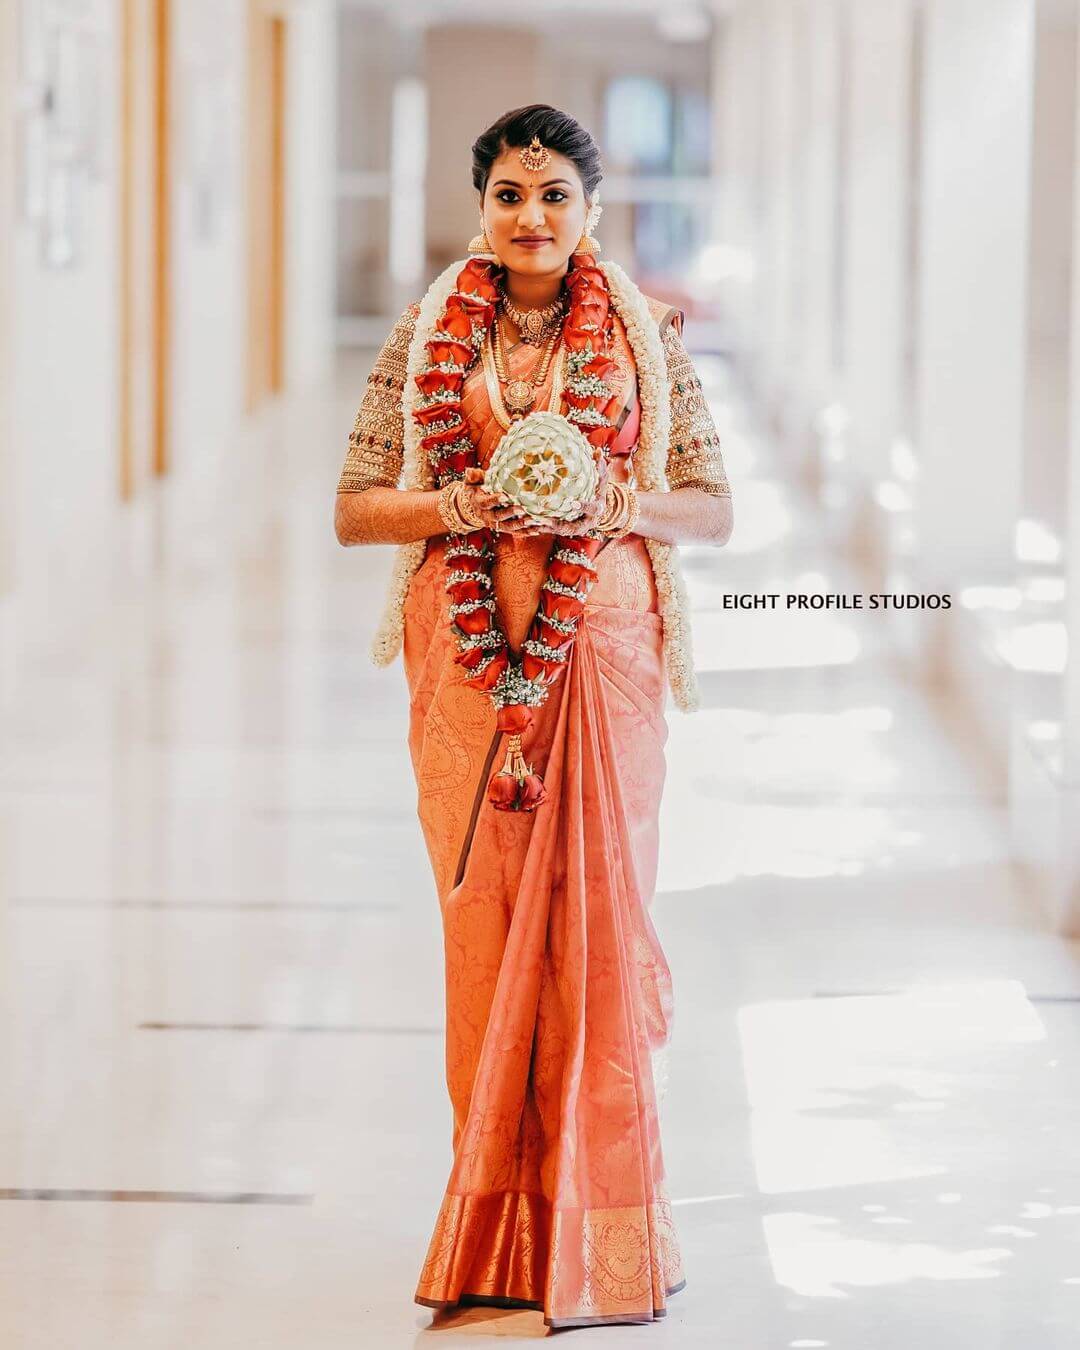 South Indian Wedding Saree for Traditional Bride South Indian wedding saree in light orange